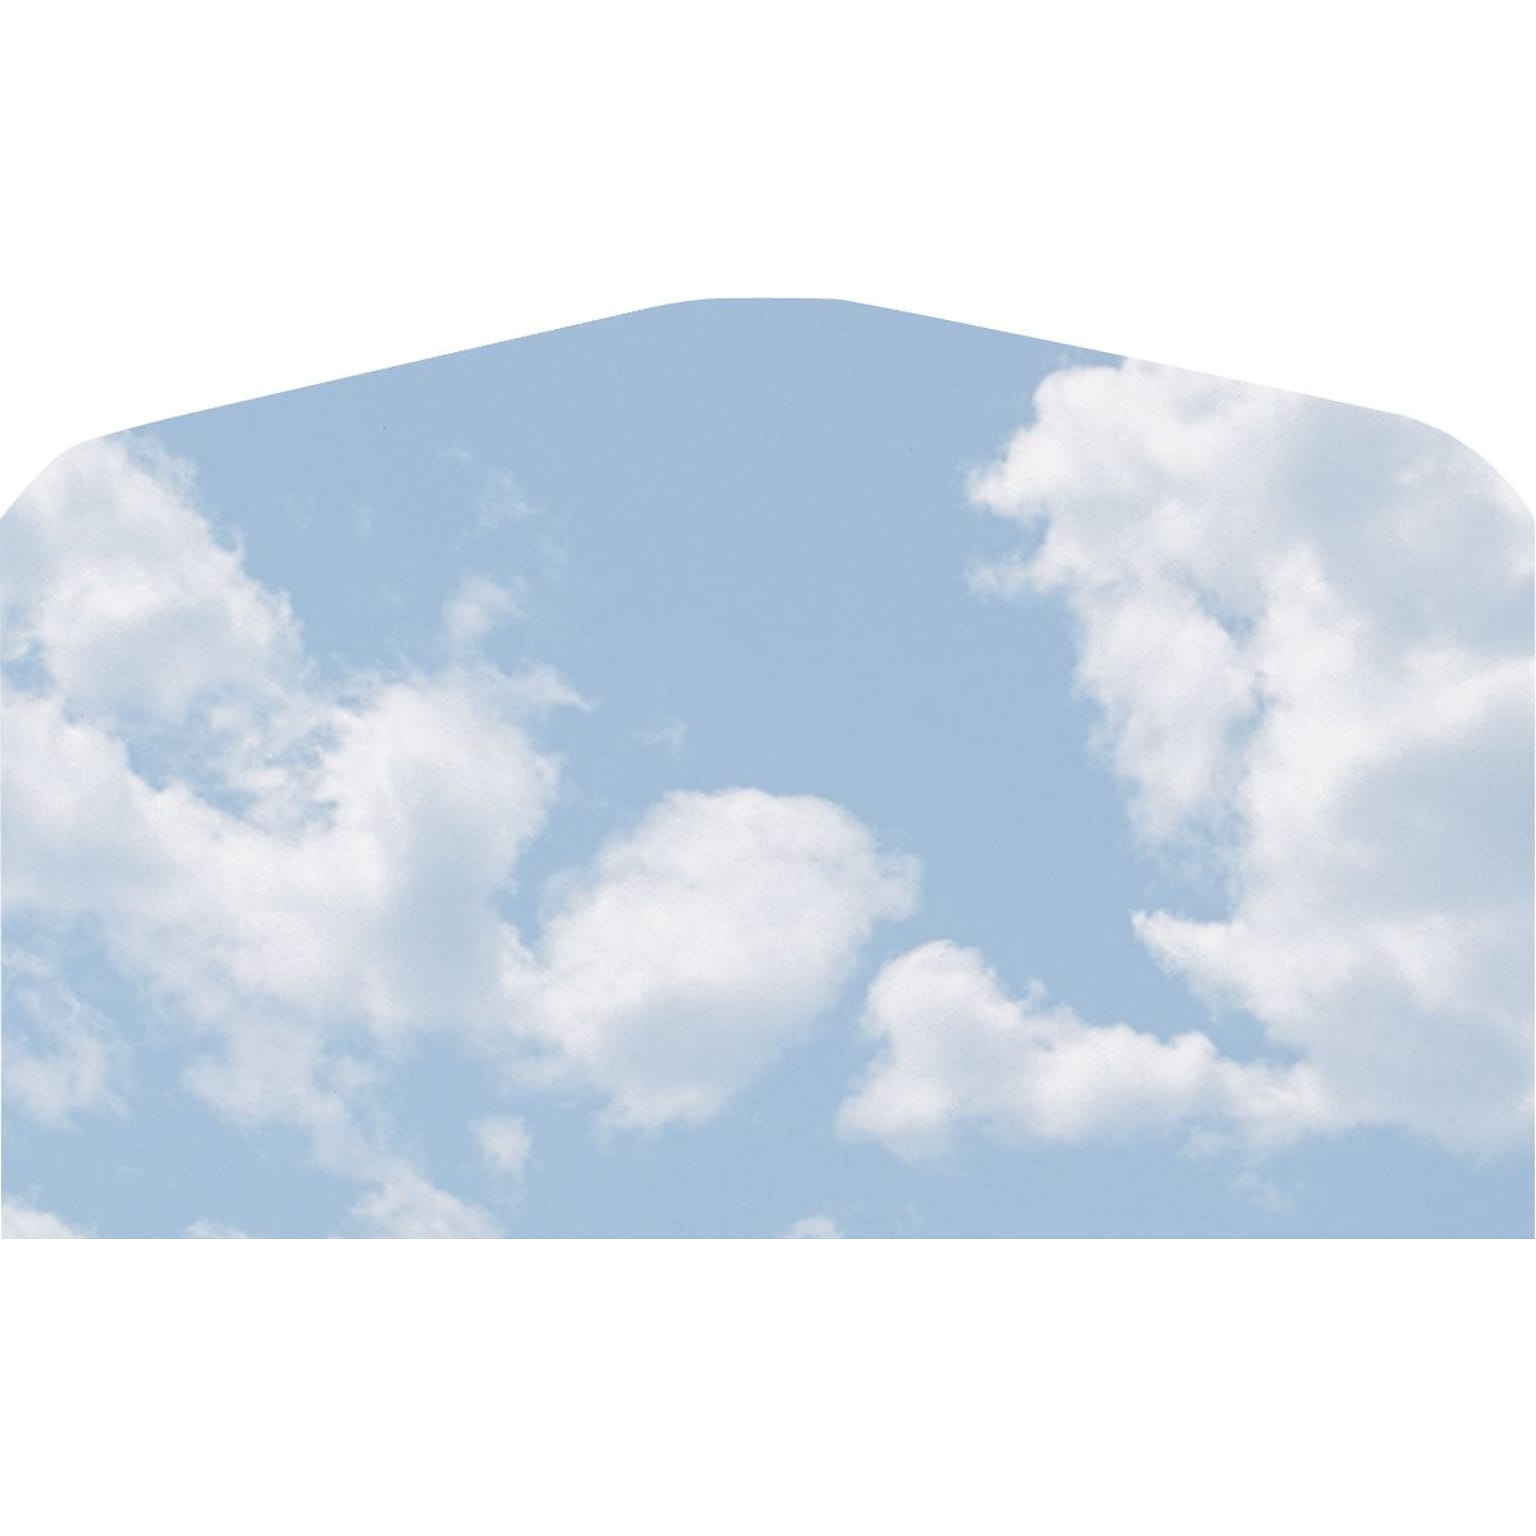 Great Papers® Clouds #10 Envelopes, 40/Pack